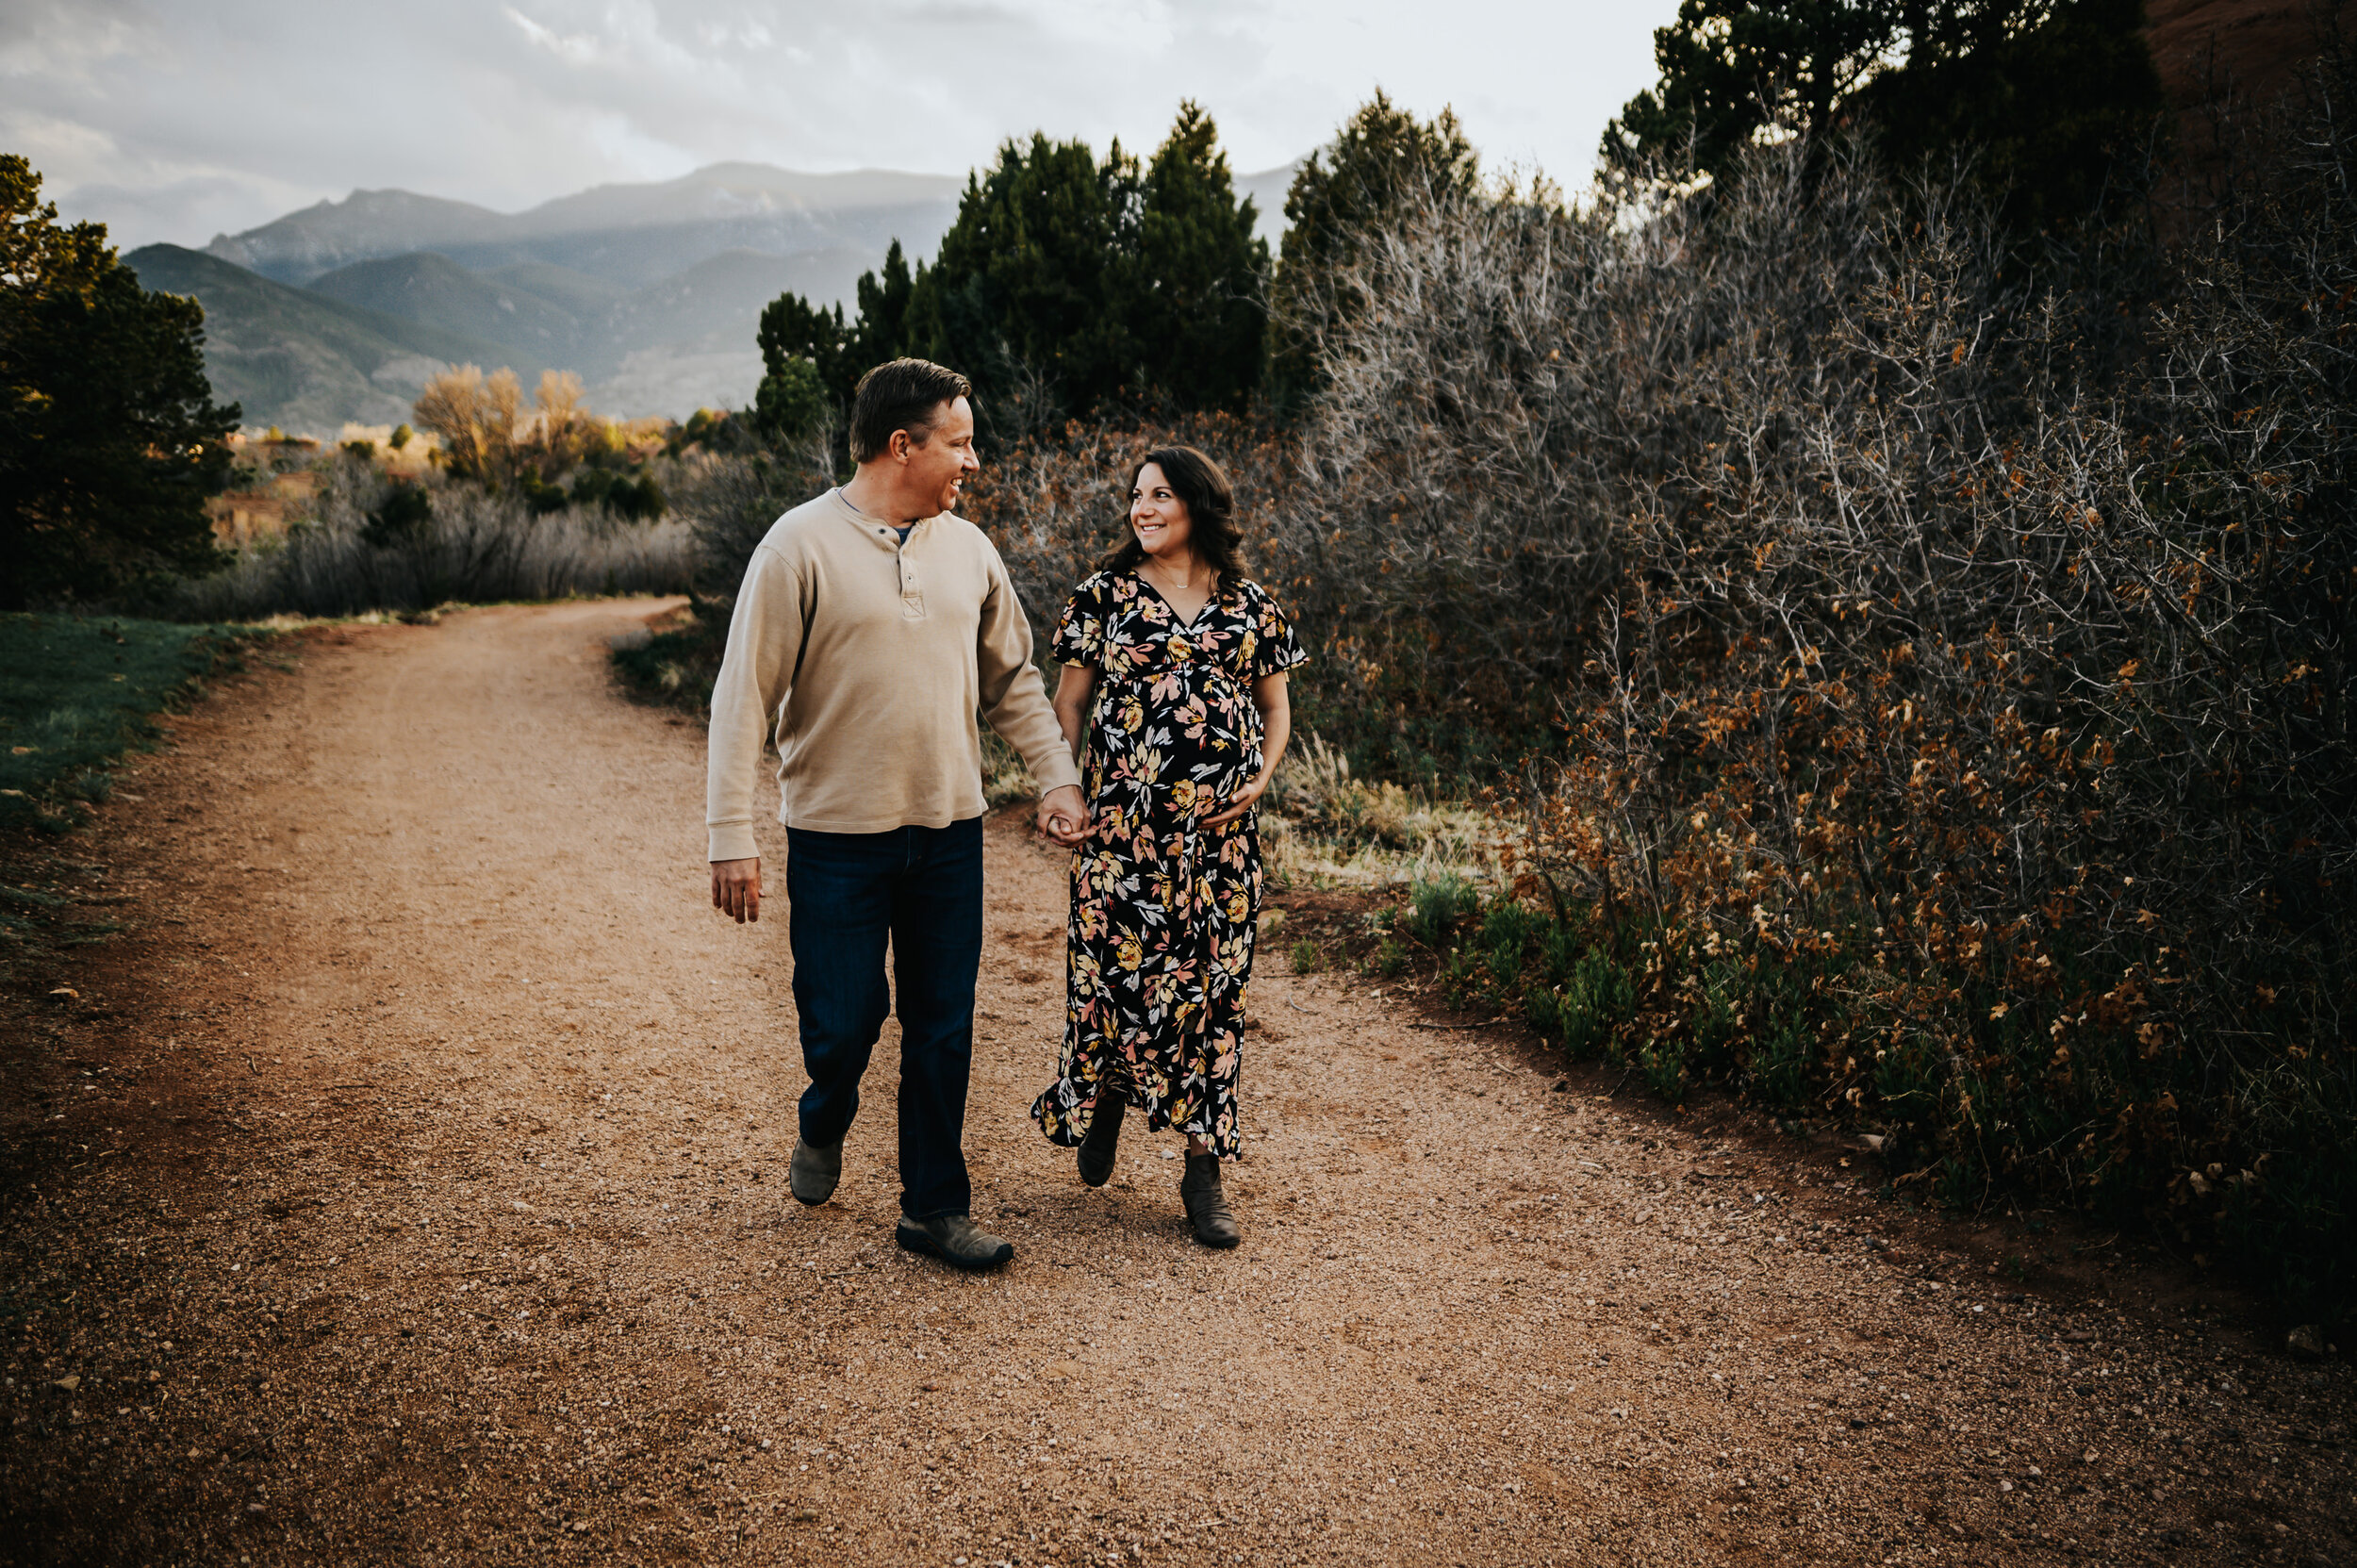 Andrea Grimm Maternity Family Session Colorado Springs Sunset Garden of the Gods Wild Prairie Photography-5-2020.jpg